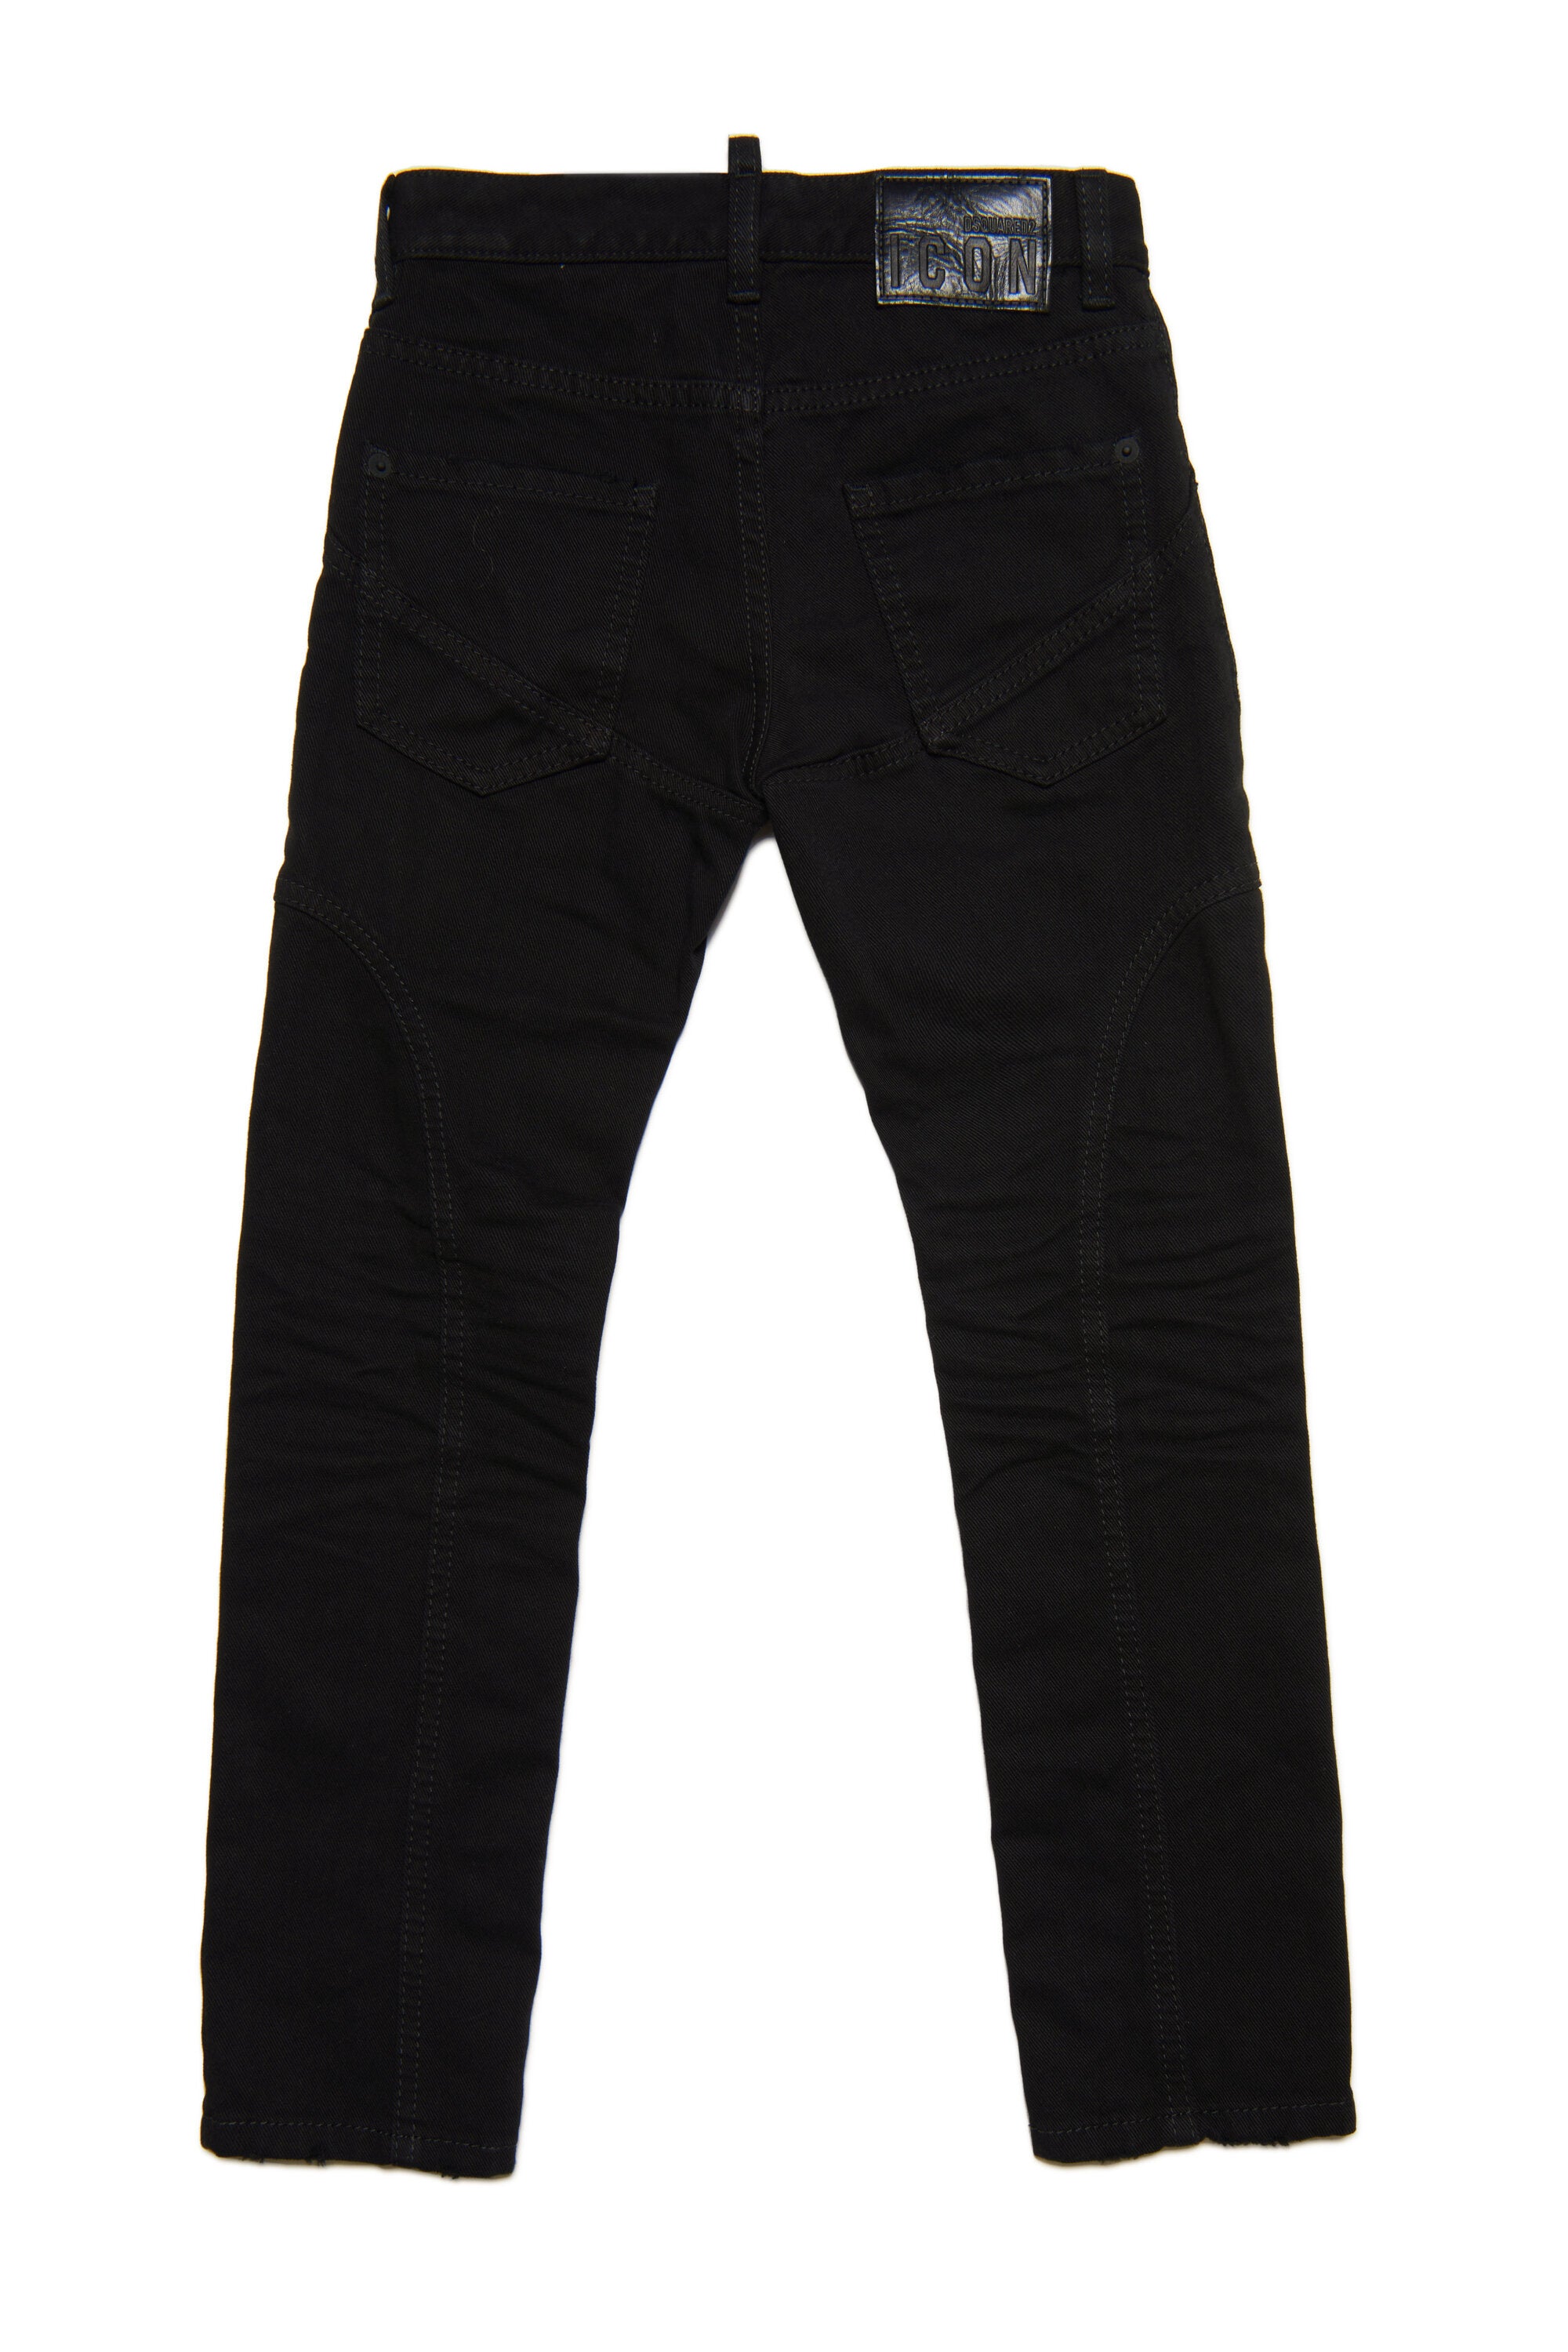 Cool Guy skinny black jeans with abrasions and Icon logo